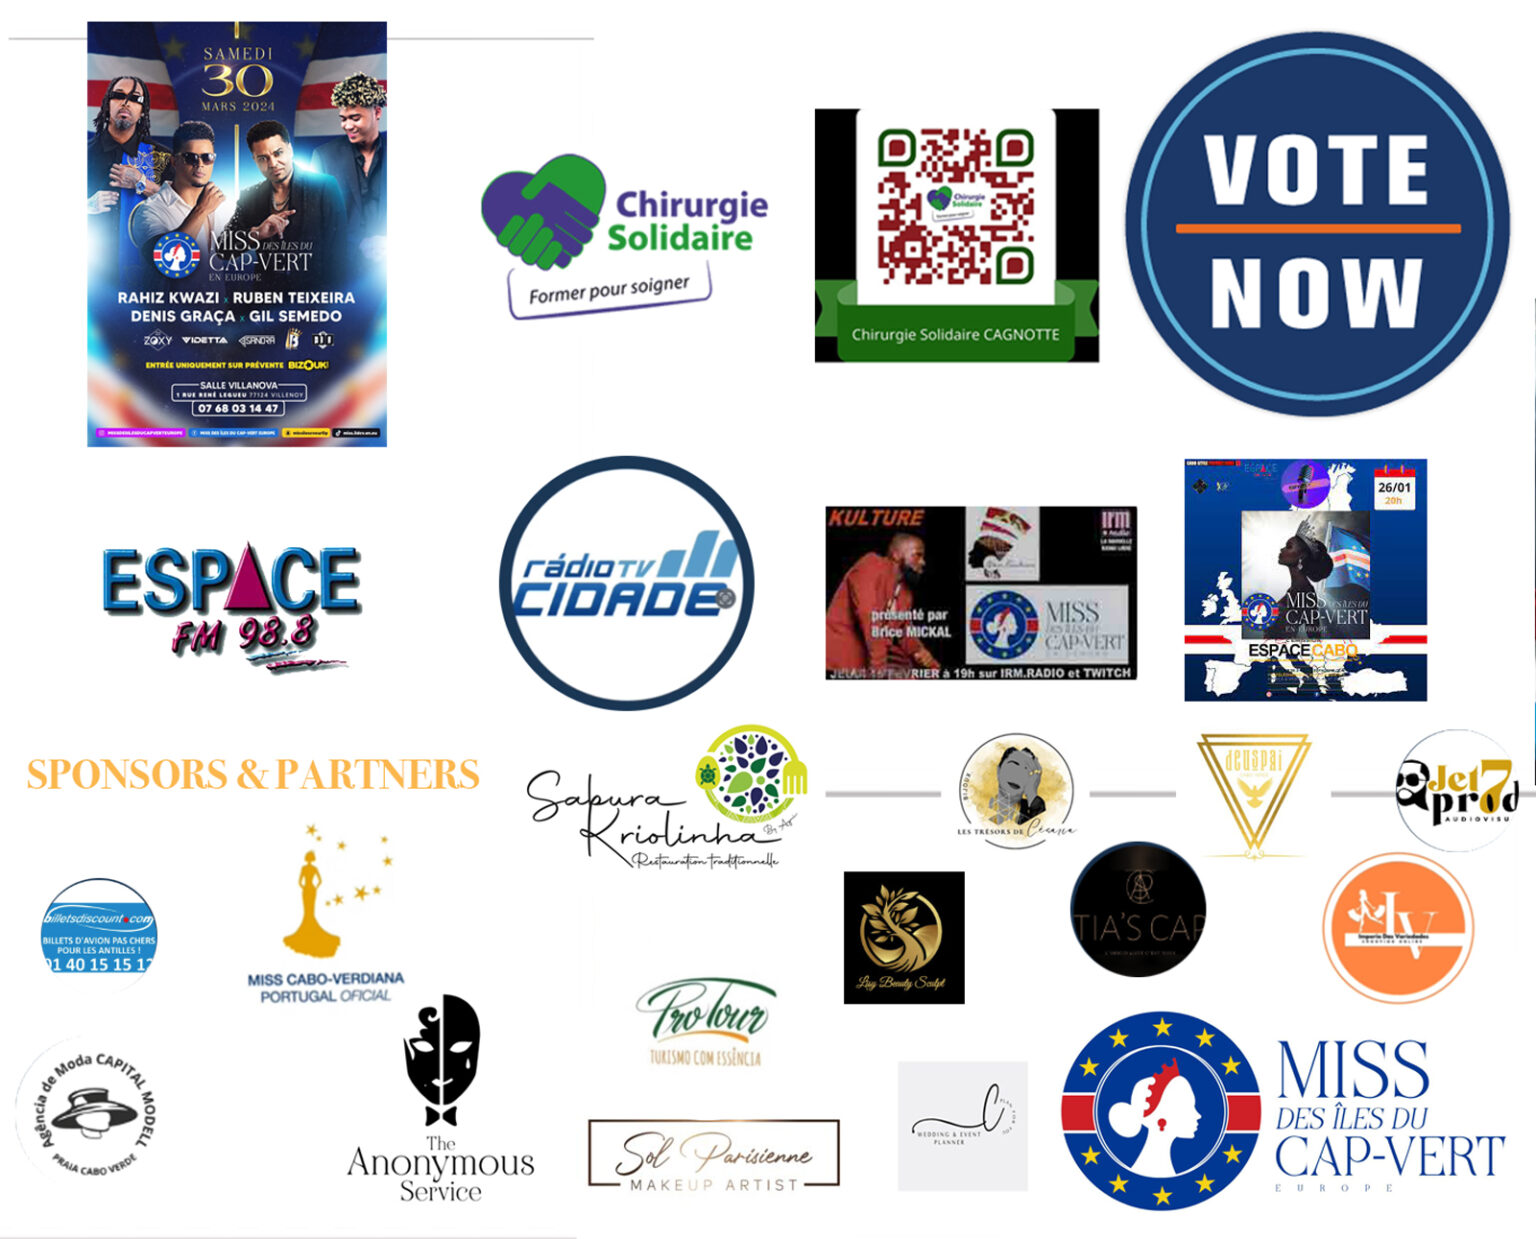 SPONSORS-AFRICA-VOGUE-COVER-Miss-Cap-Vert-des-Iles-Europe-Edition-1-and-the-Esteemed-Sponsors-and-Partnerst-DN-AFRICA-Media-Partner